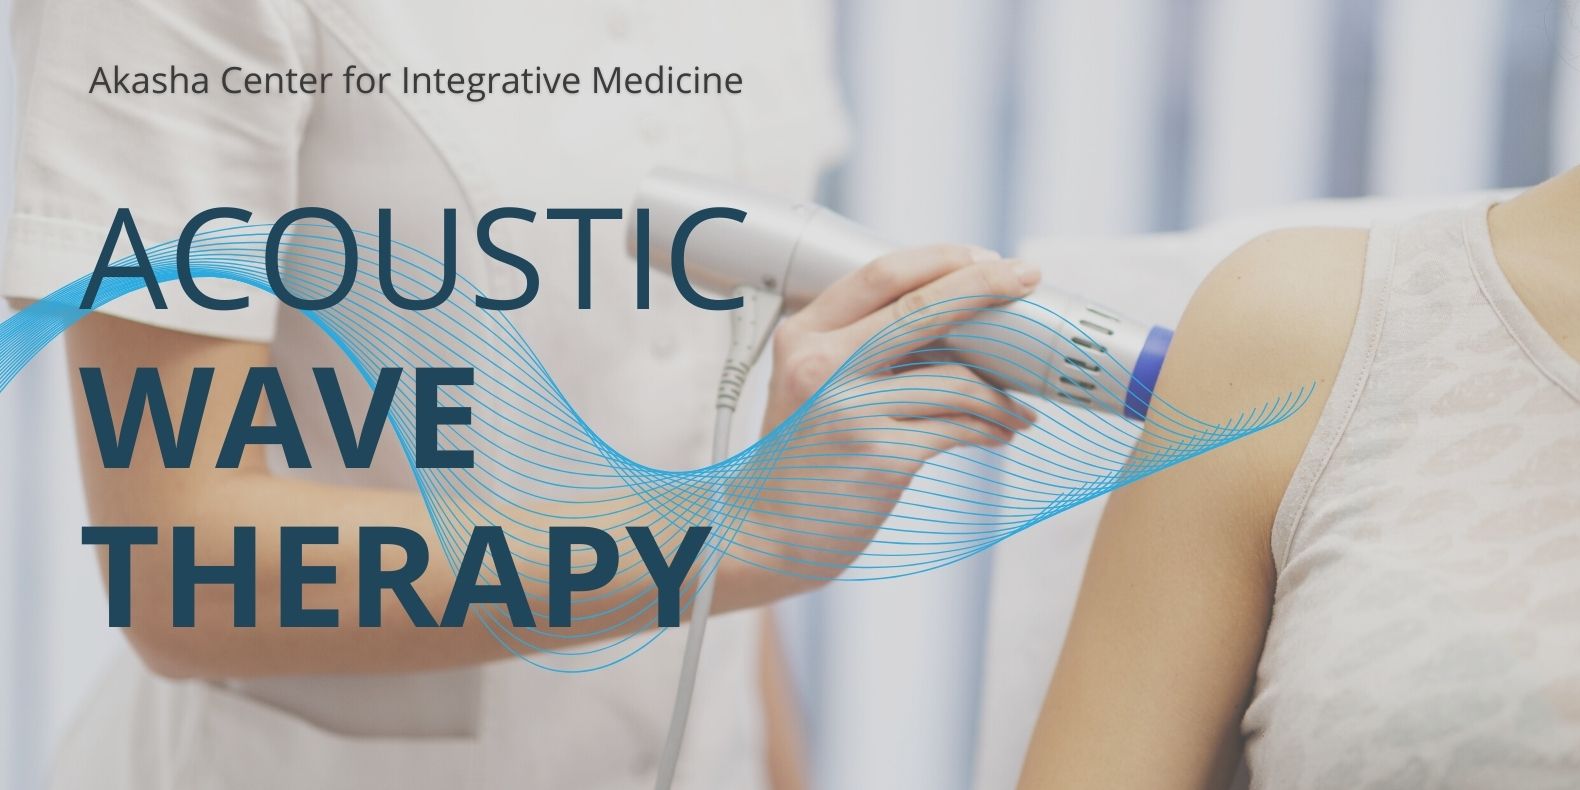 https://cdn.shopify.com/s/files/1/0609/2233/articles/acoustic_wave_therapy.jpg?v=1682536700